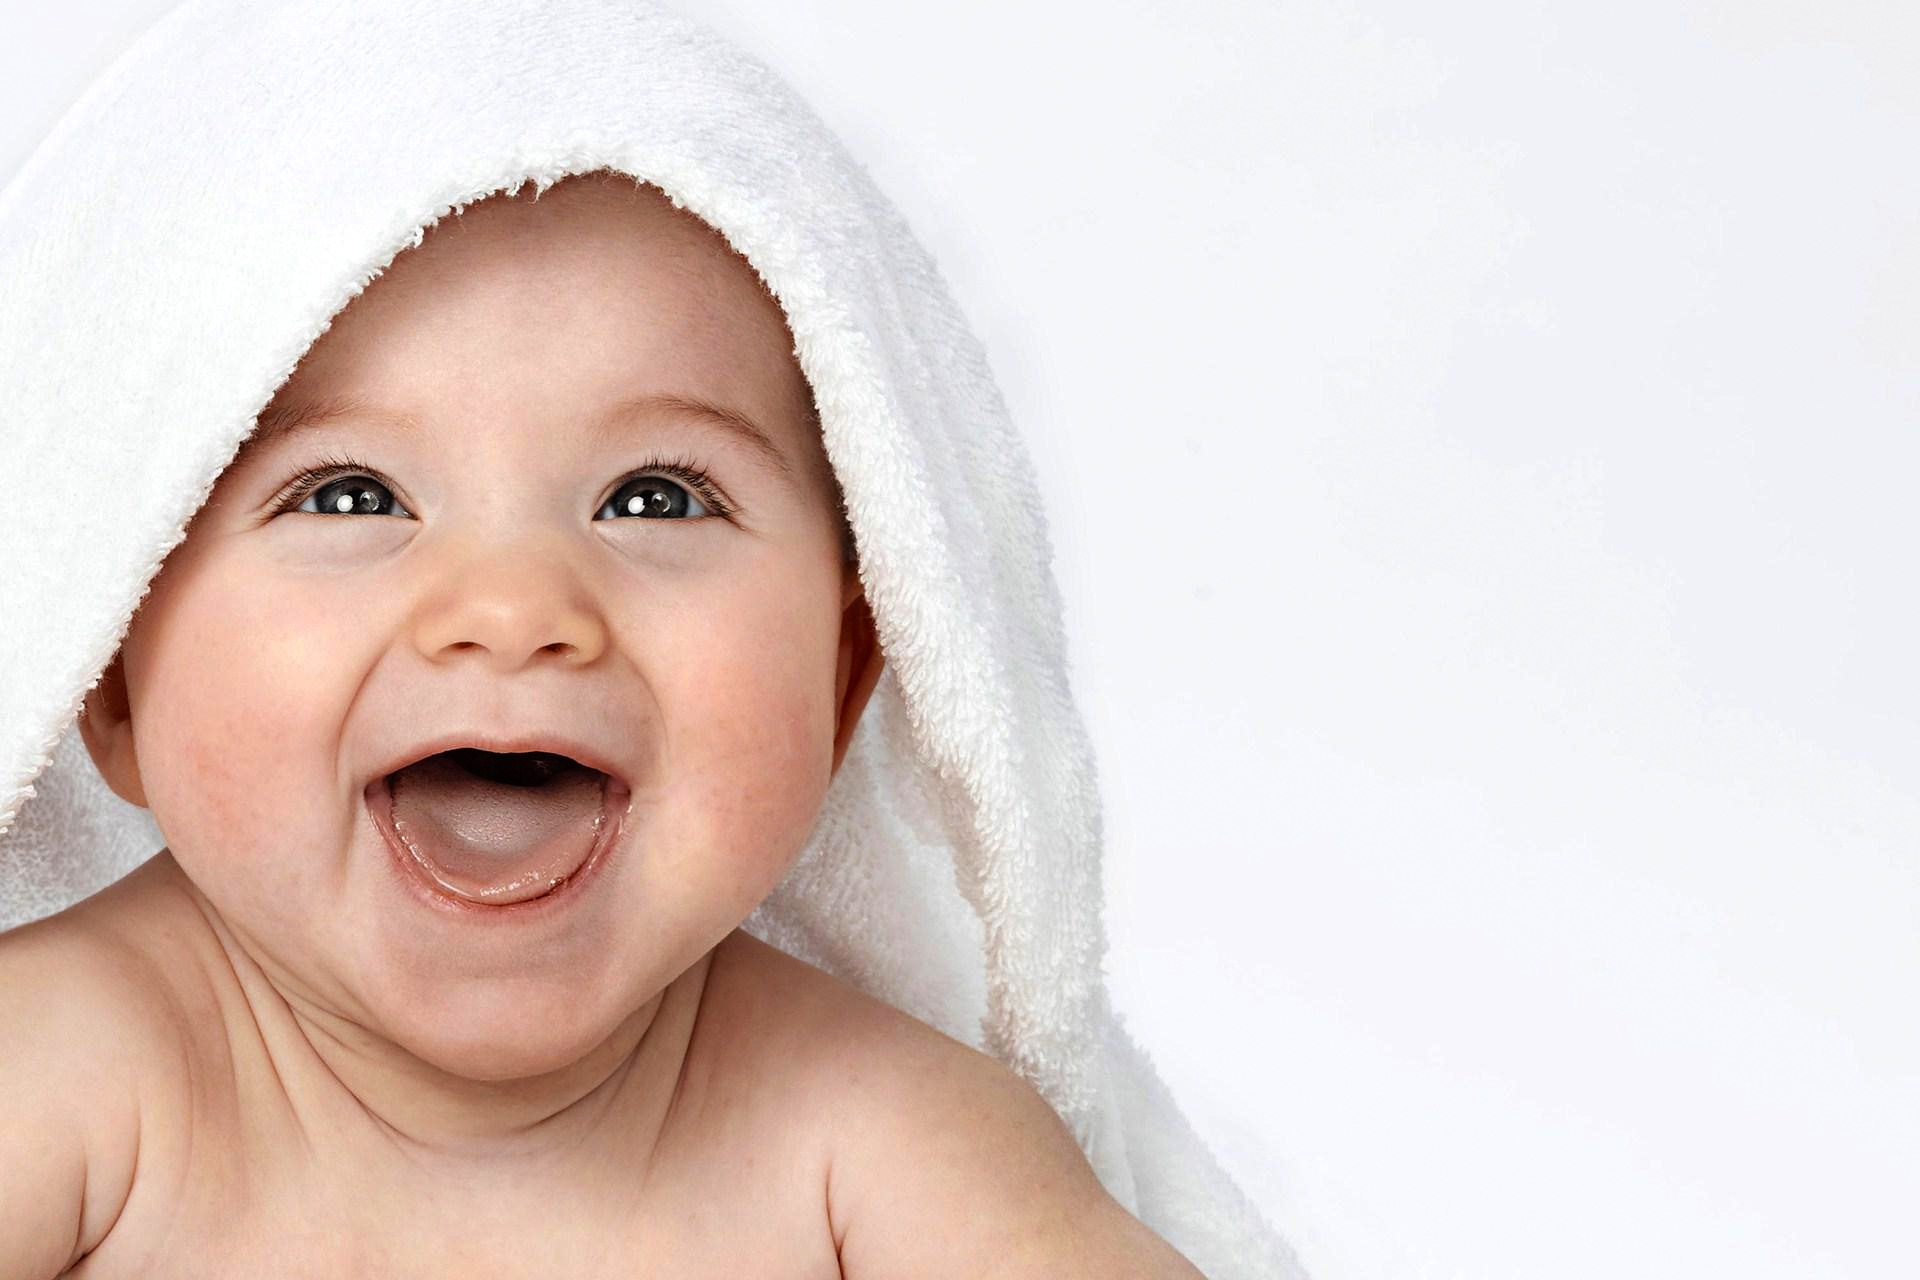 Amazing baby smile face very cute - New hd wallpaperNew hd wallpaper